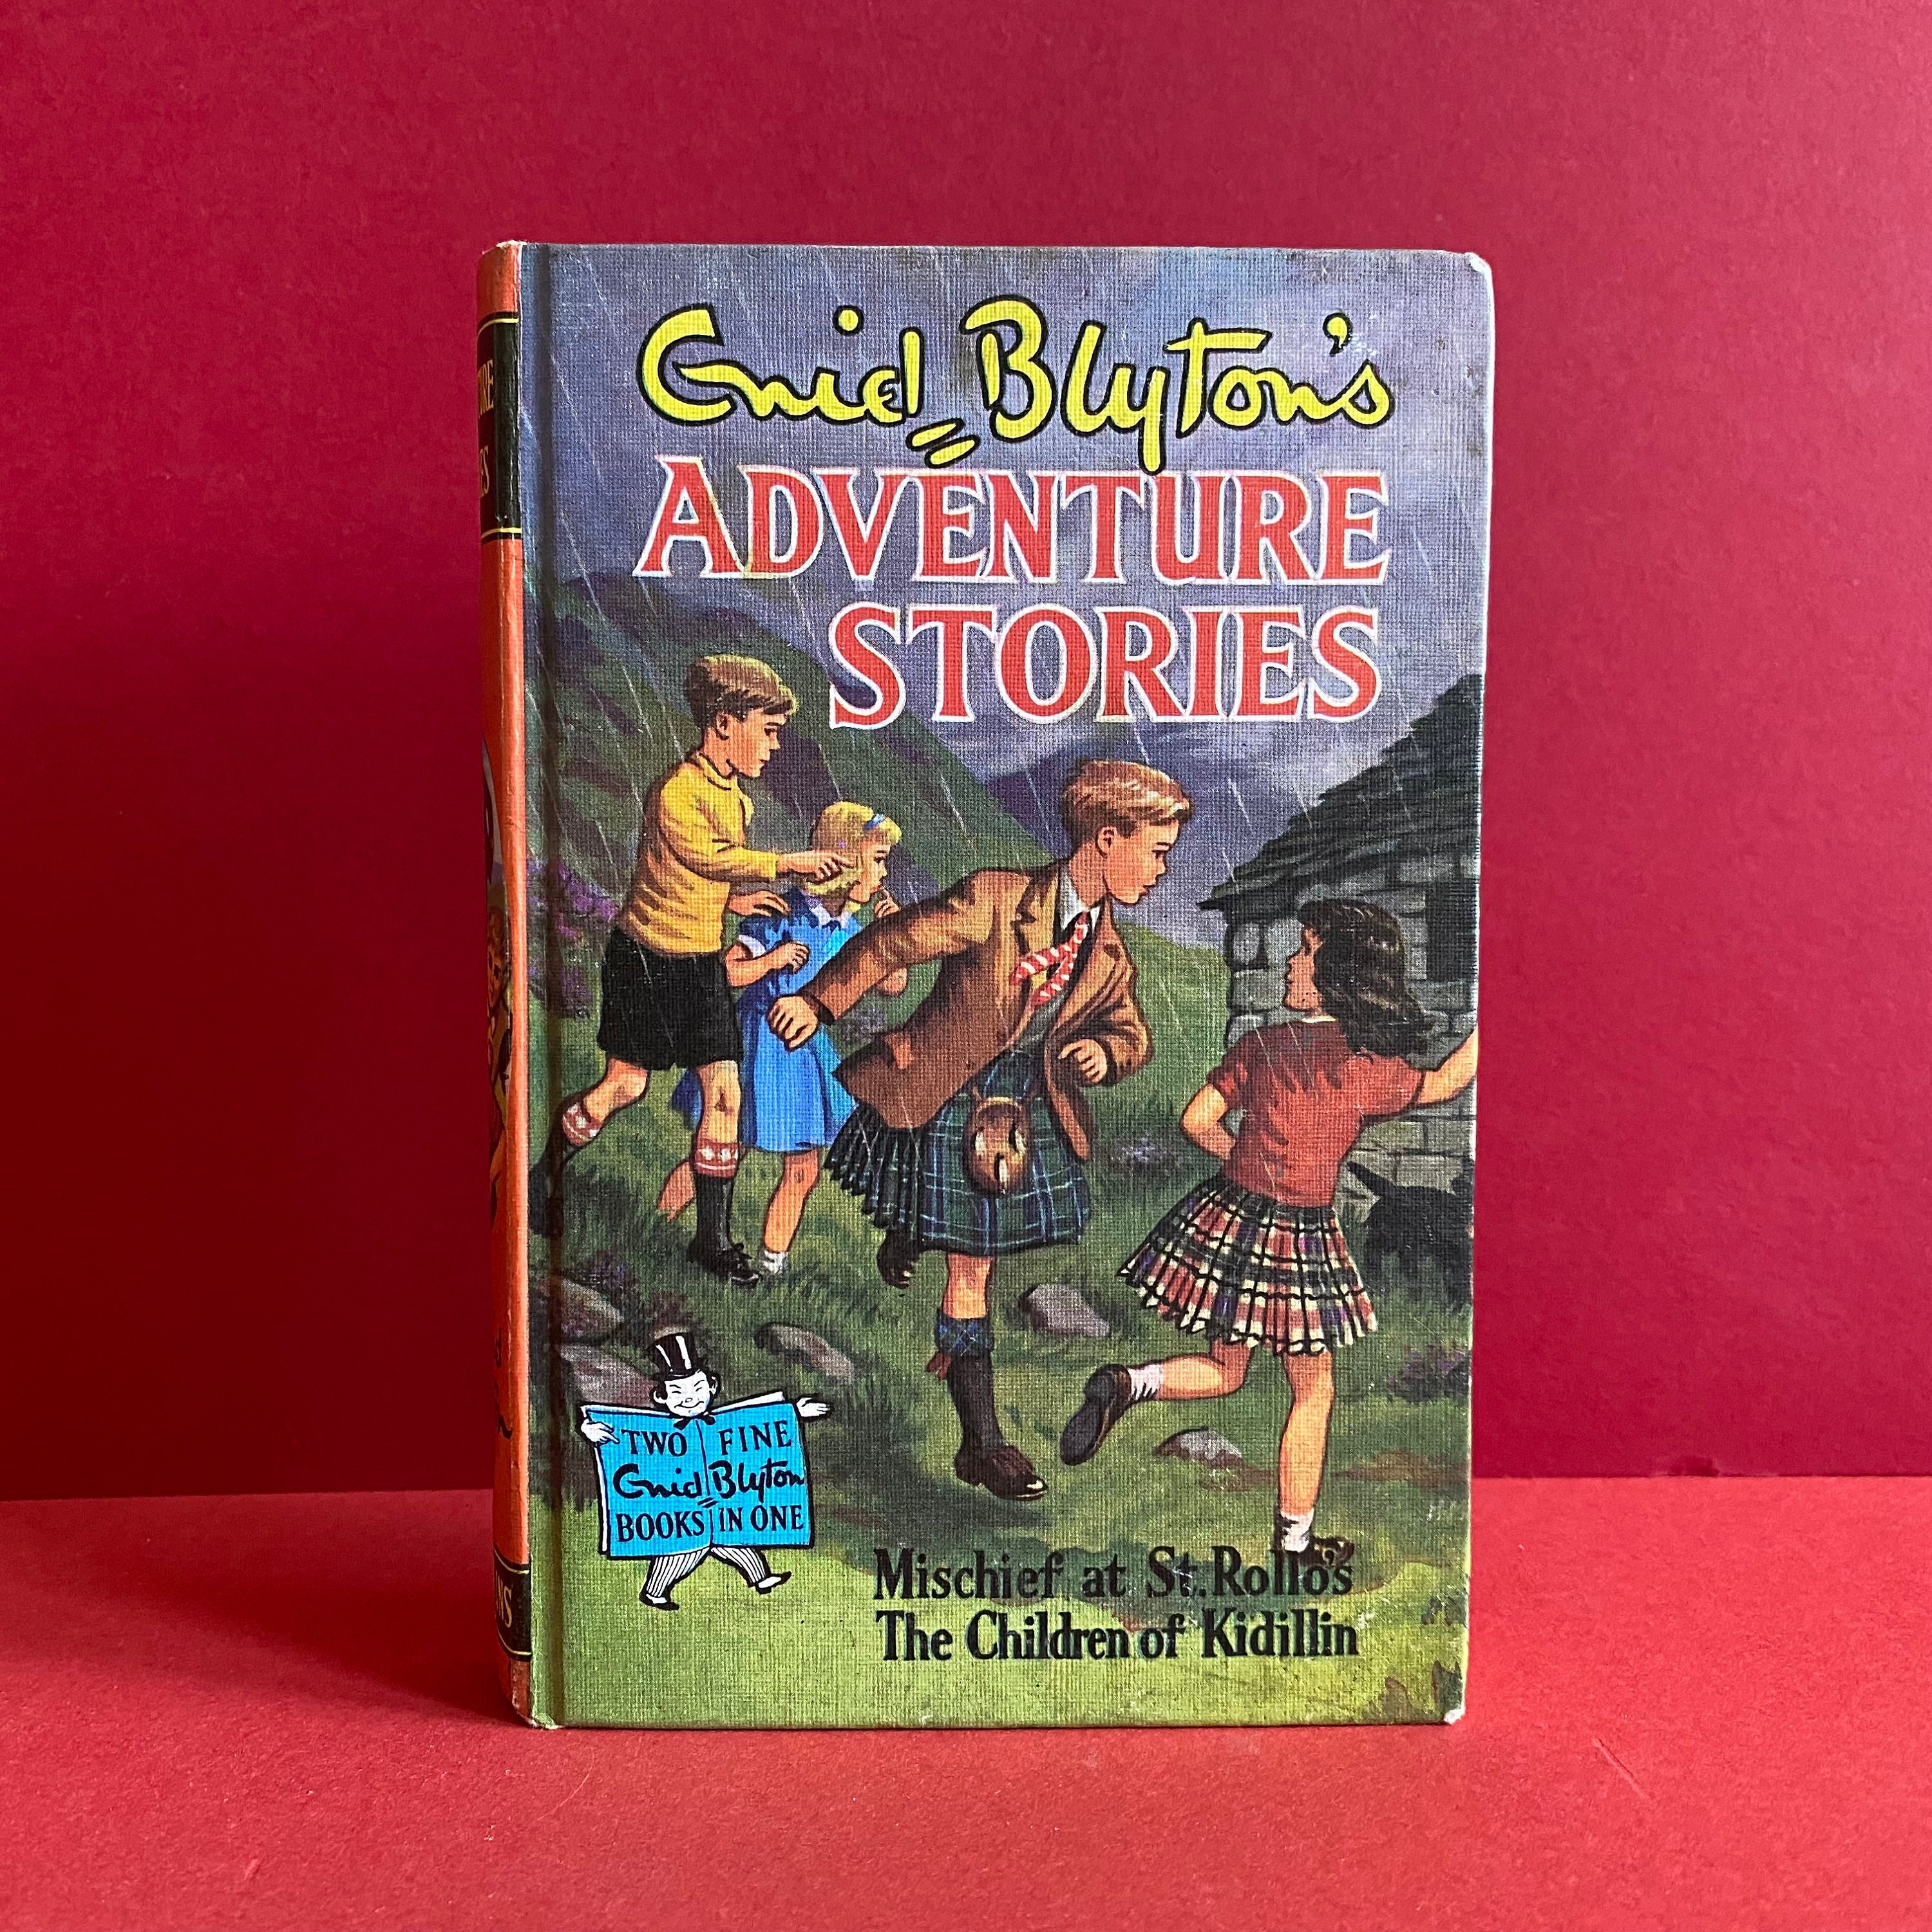 Adventure Stories the Library of Classic Adventures by Famous Authors  Childrens Storybooks Adventure Books Book Gifts for Young Readers 